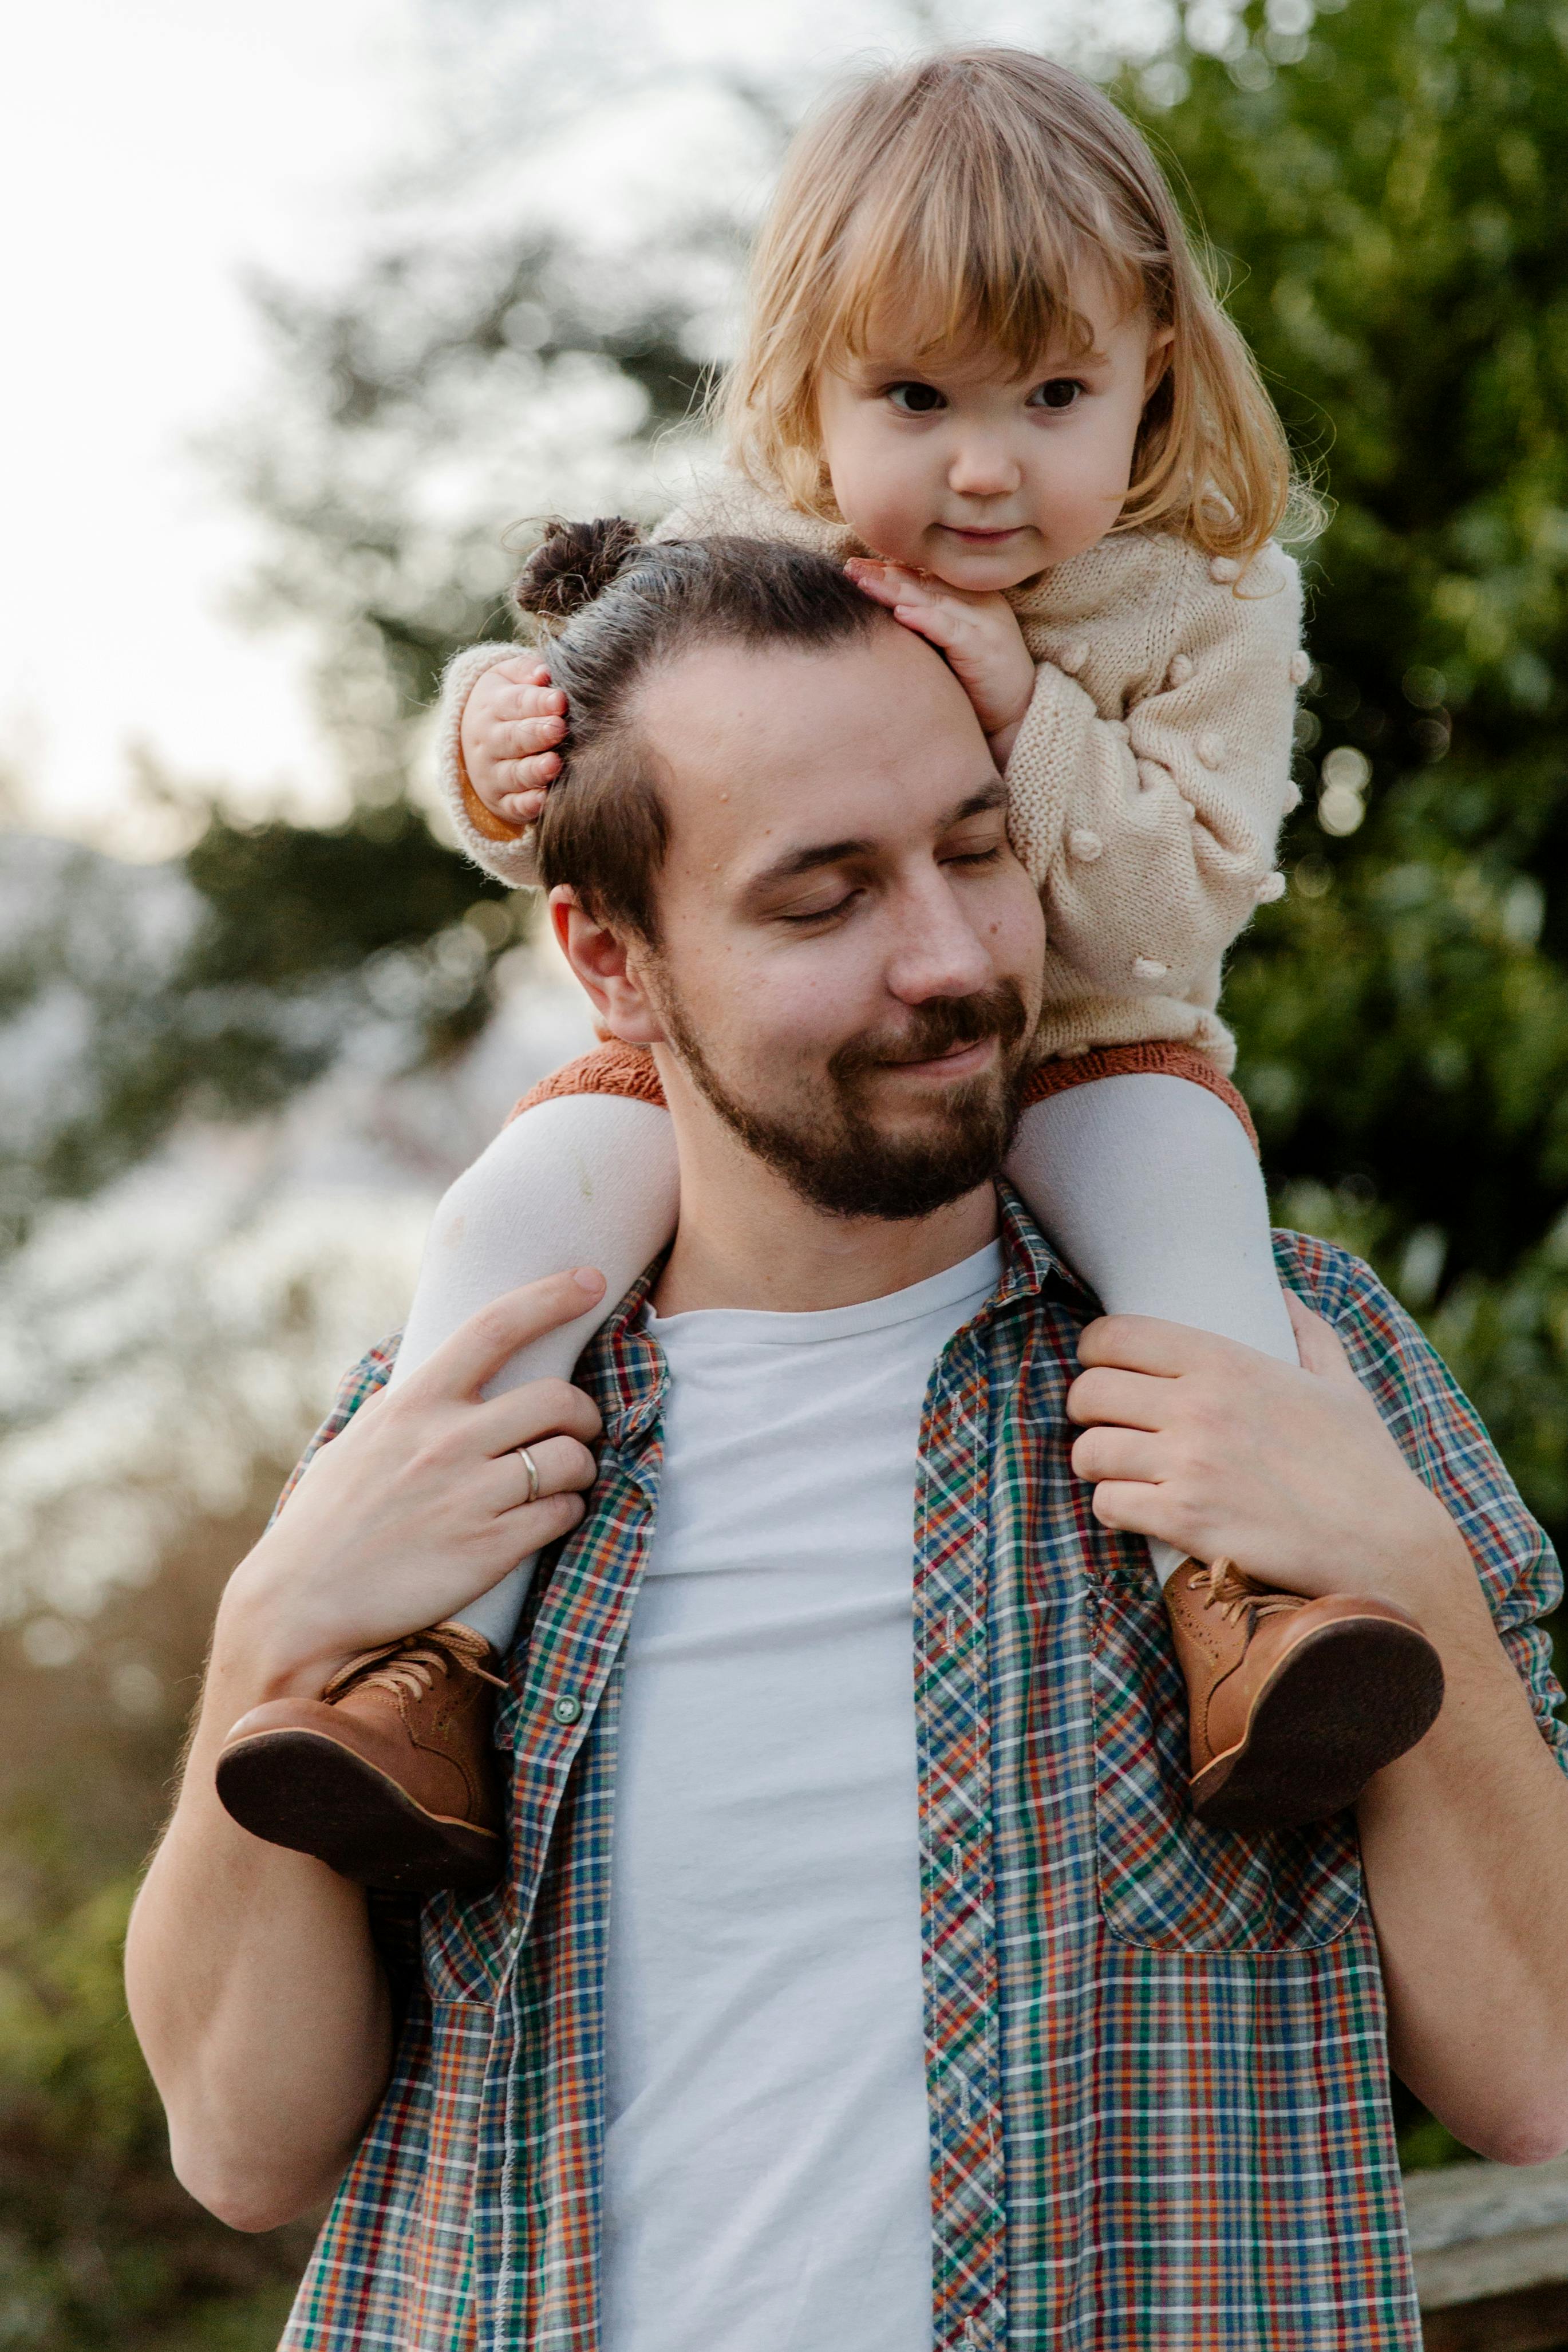 Daughter on her father's shoulders | Source: Pexels